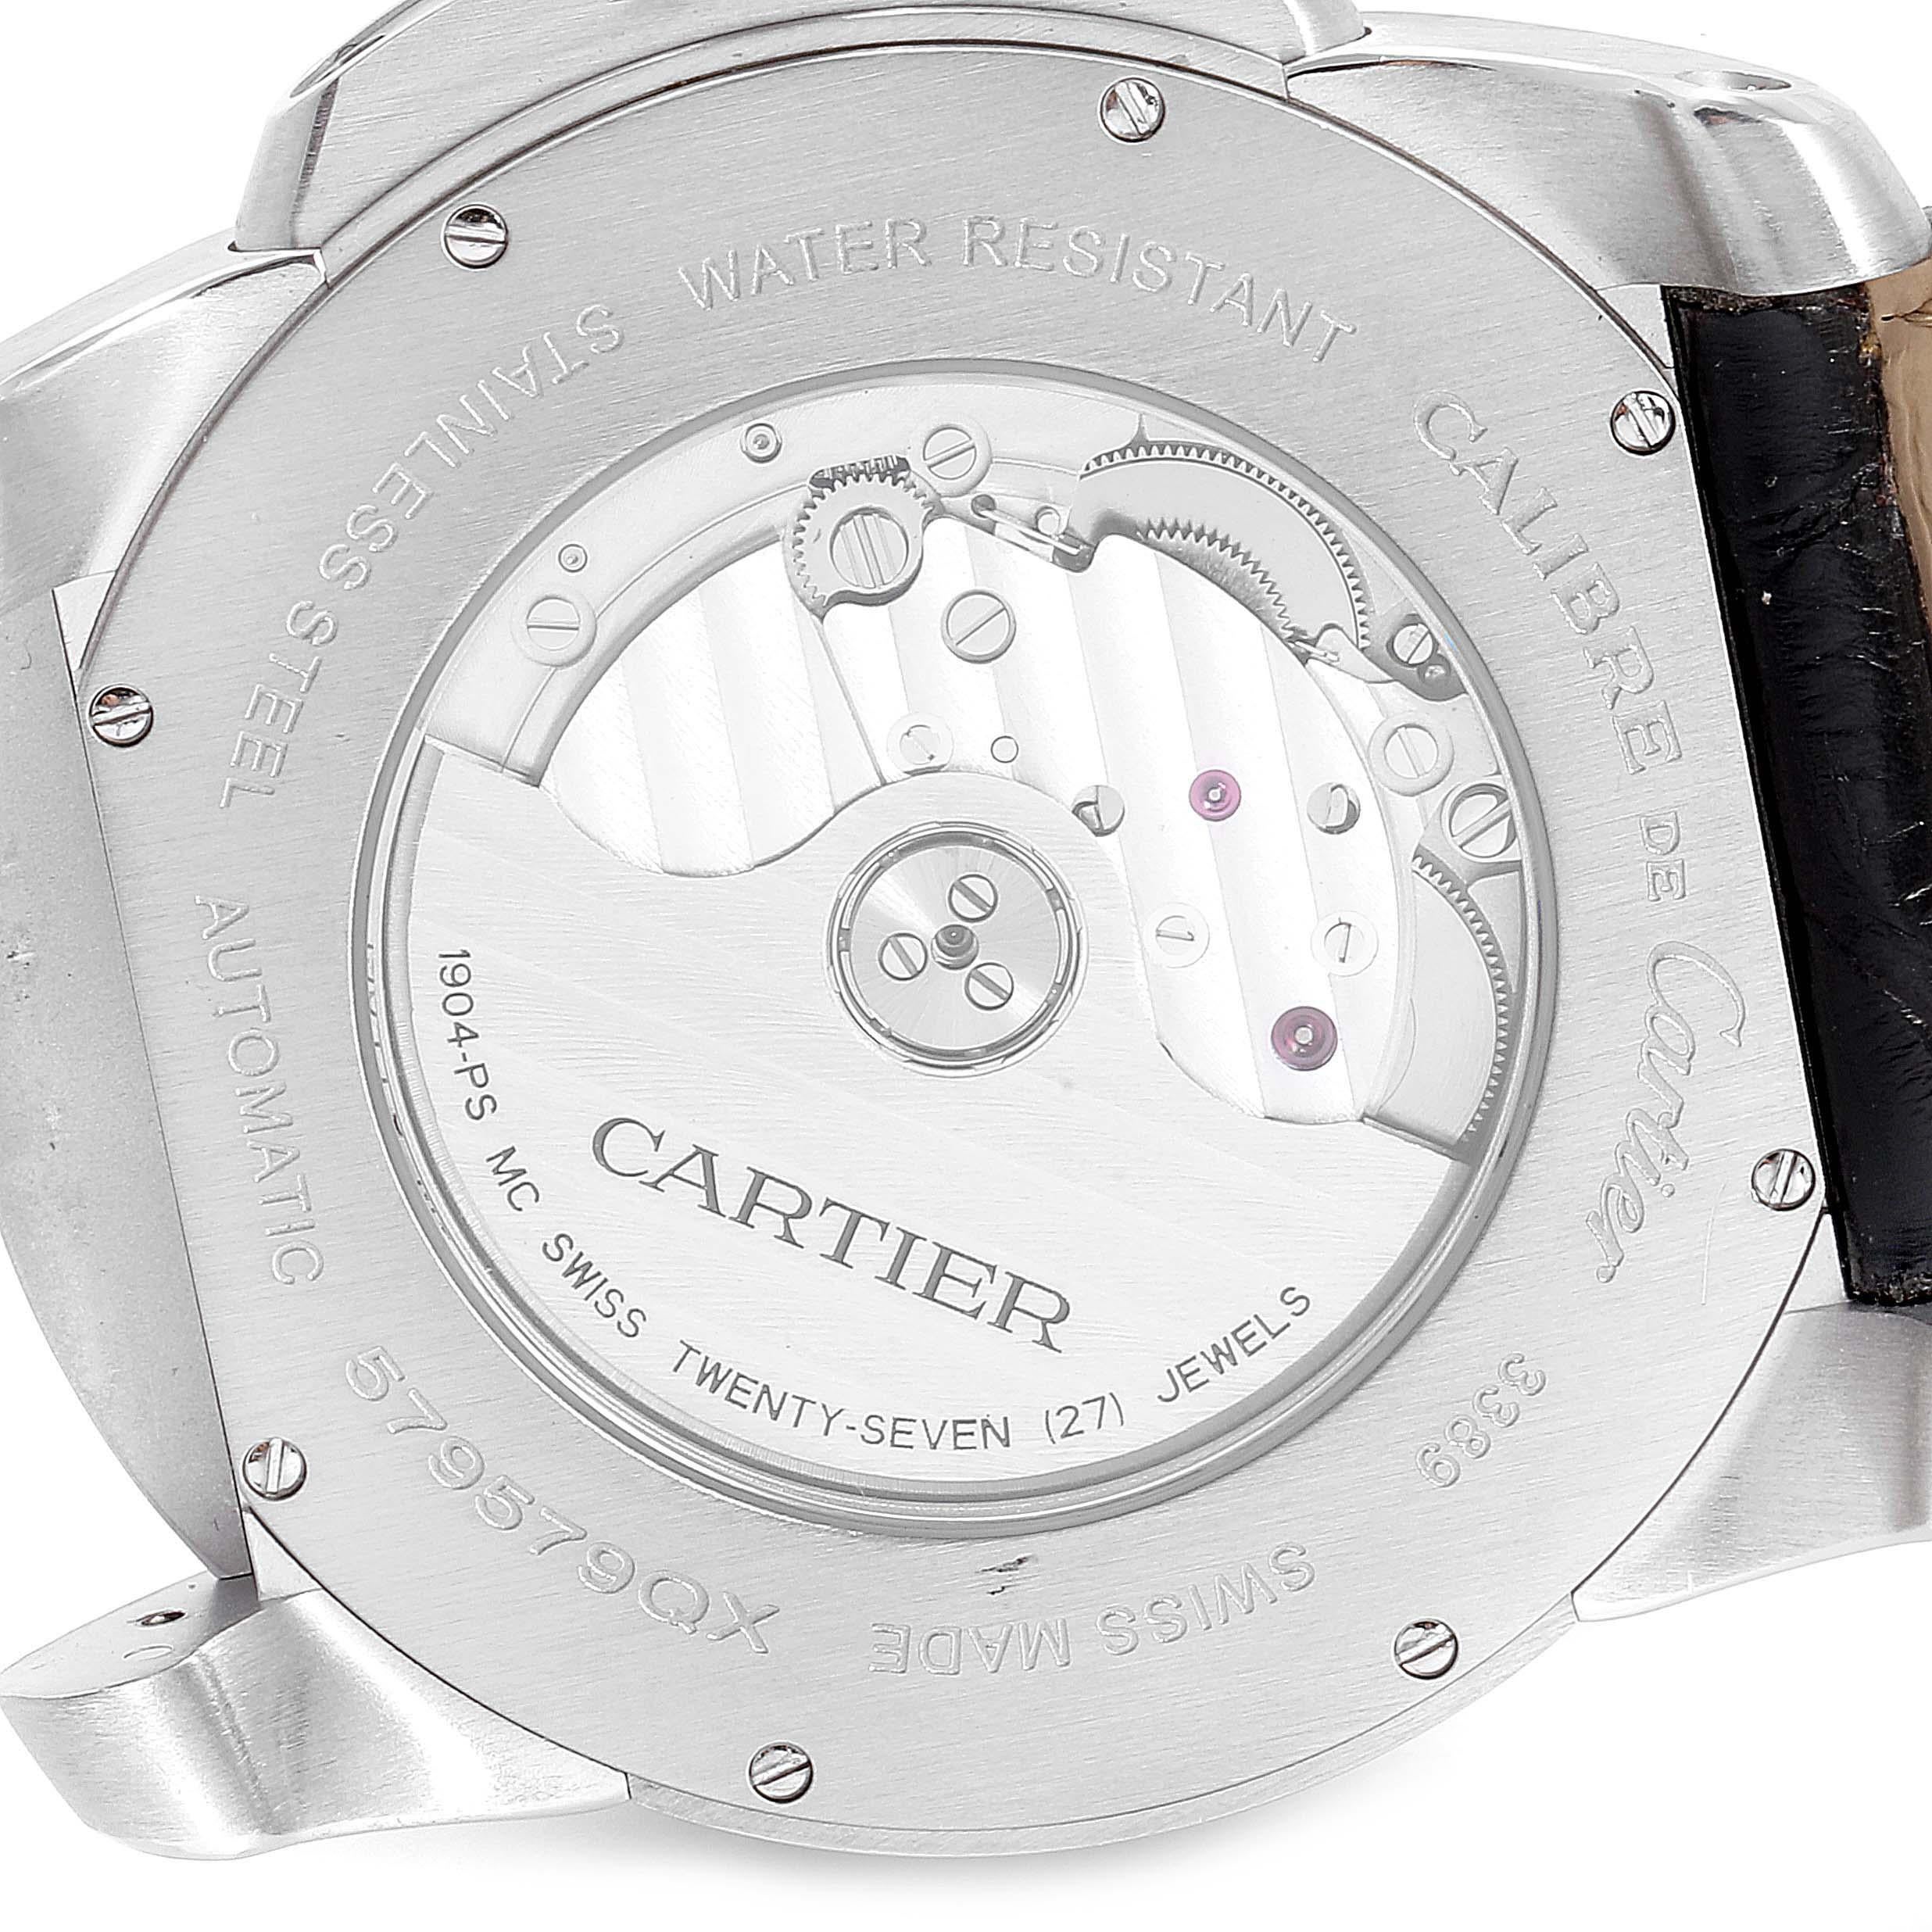 Cartier Calibre Silver Dial Steel Men's Watch W7100037 Box Papers 3